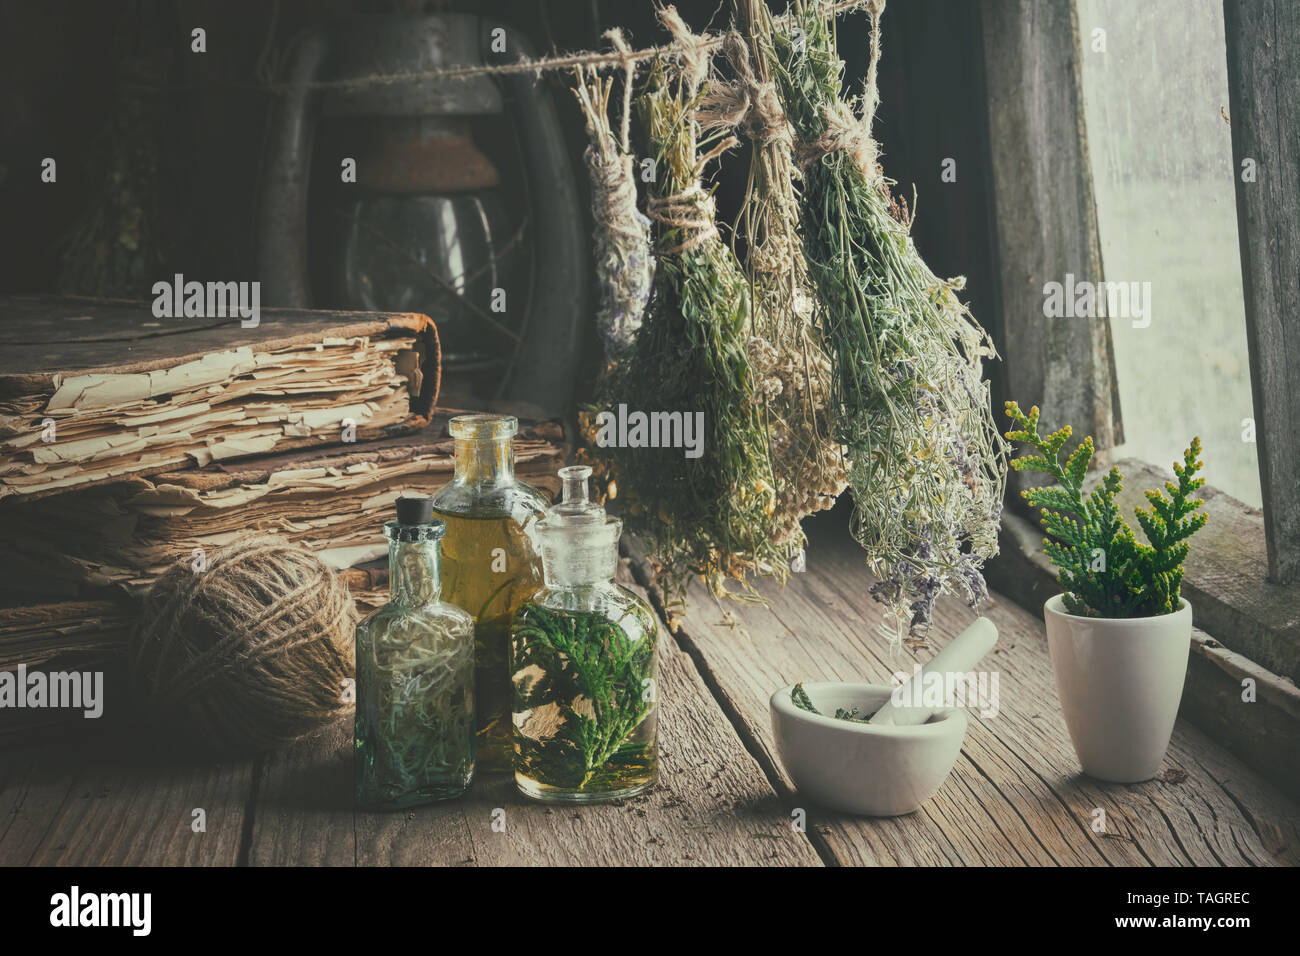 Infusion bottles, old books, mortar and hanging bunches of dry medicinal herbs. Herbal medicine. Retro styled. Stock Photo